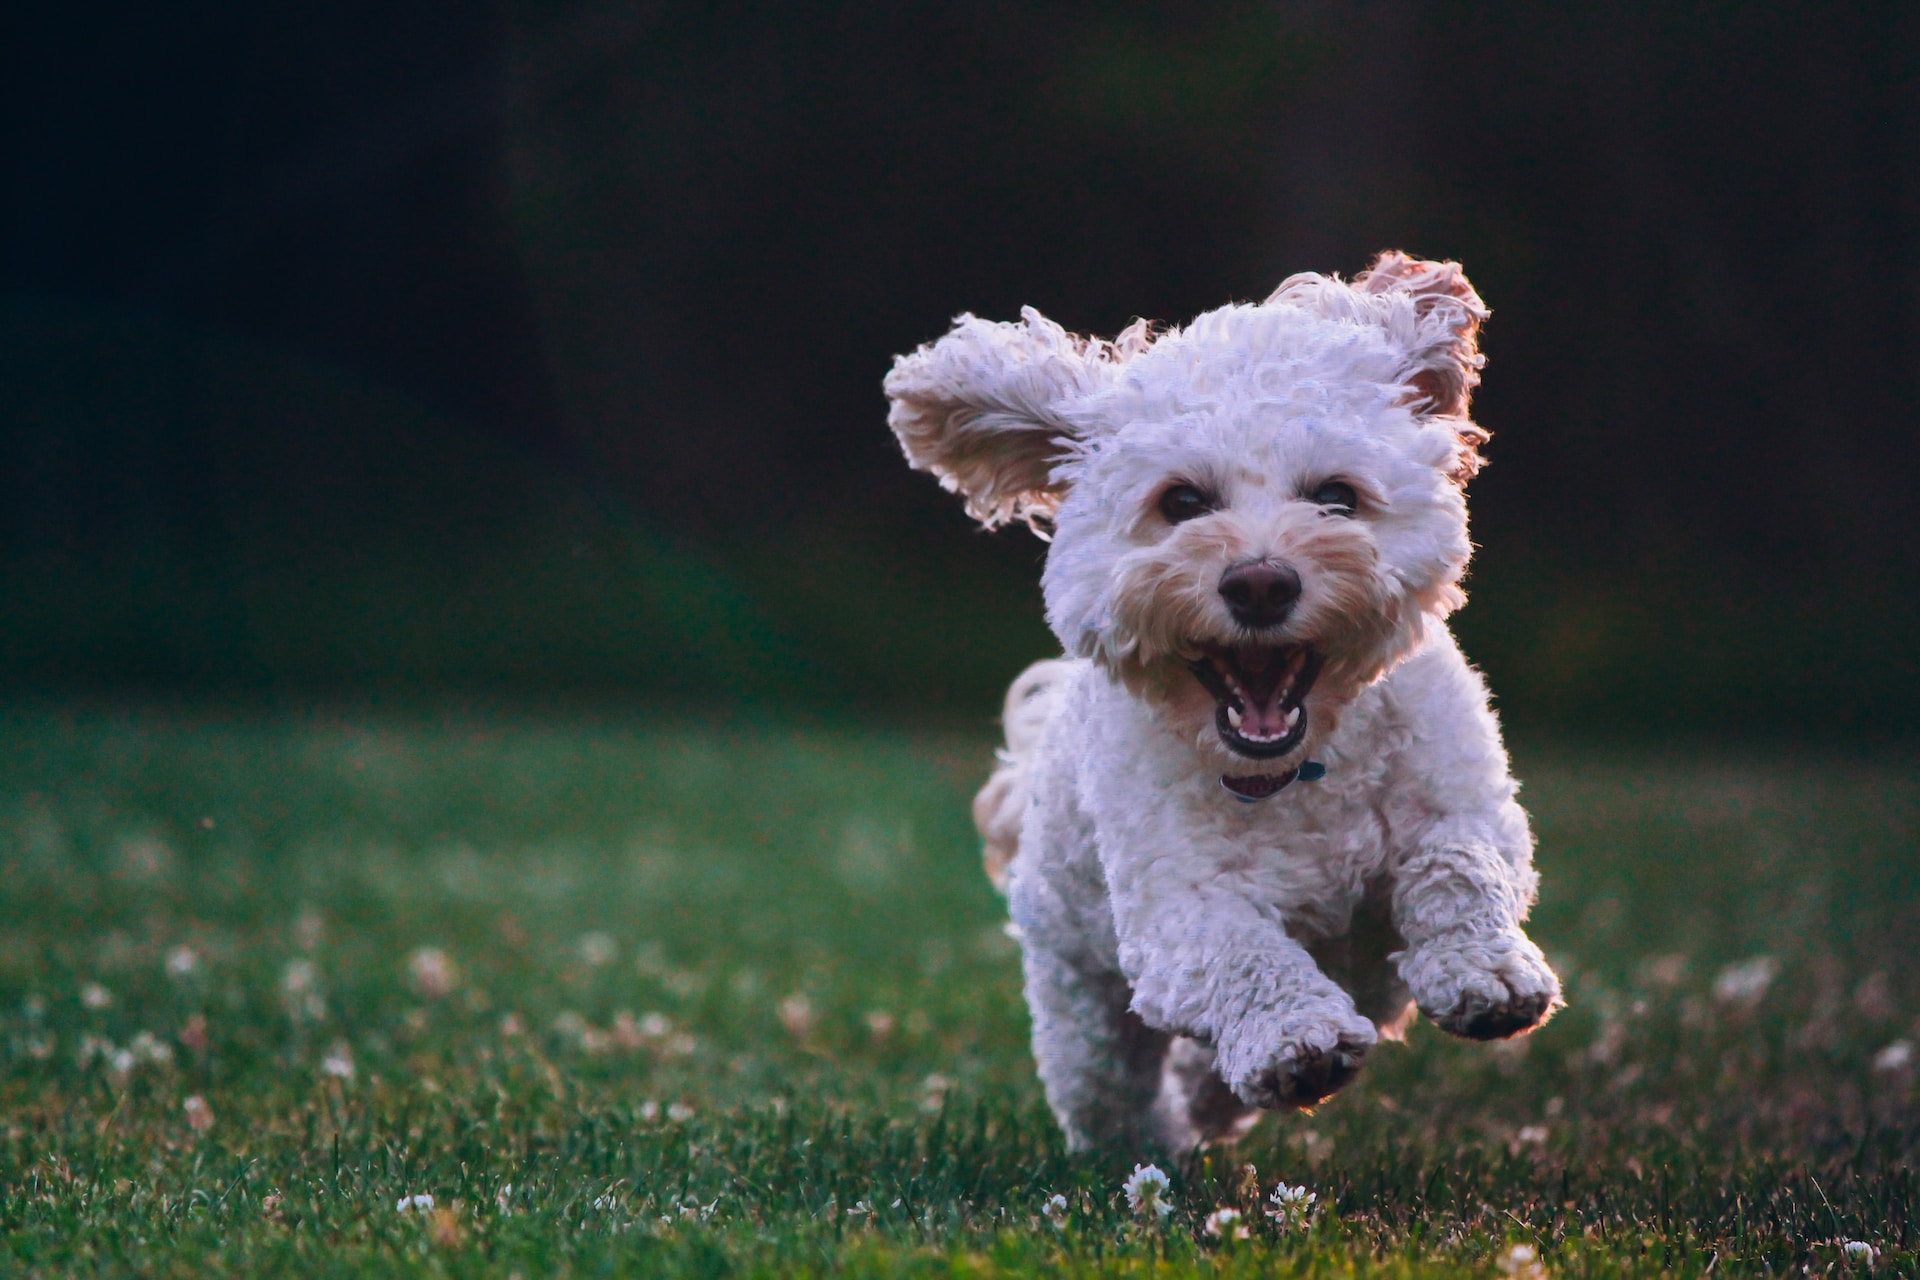 A white fluffy dog running on grass to protect feet from hot pavement.